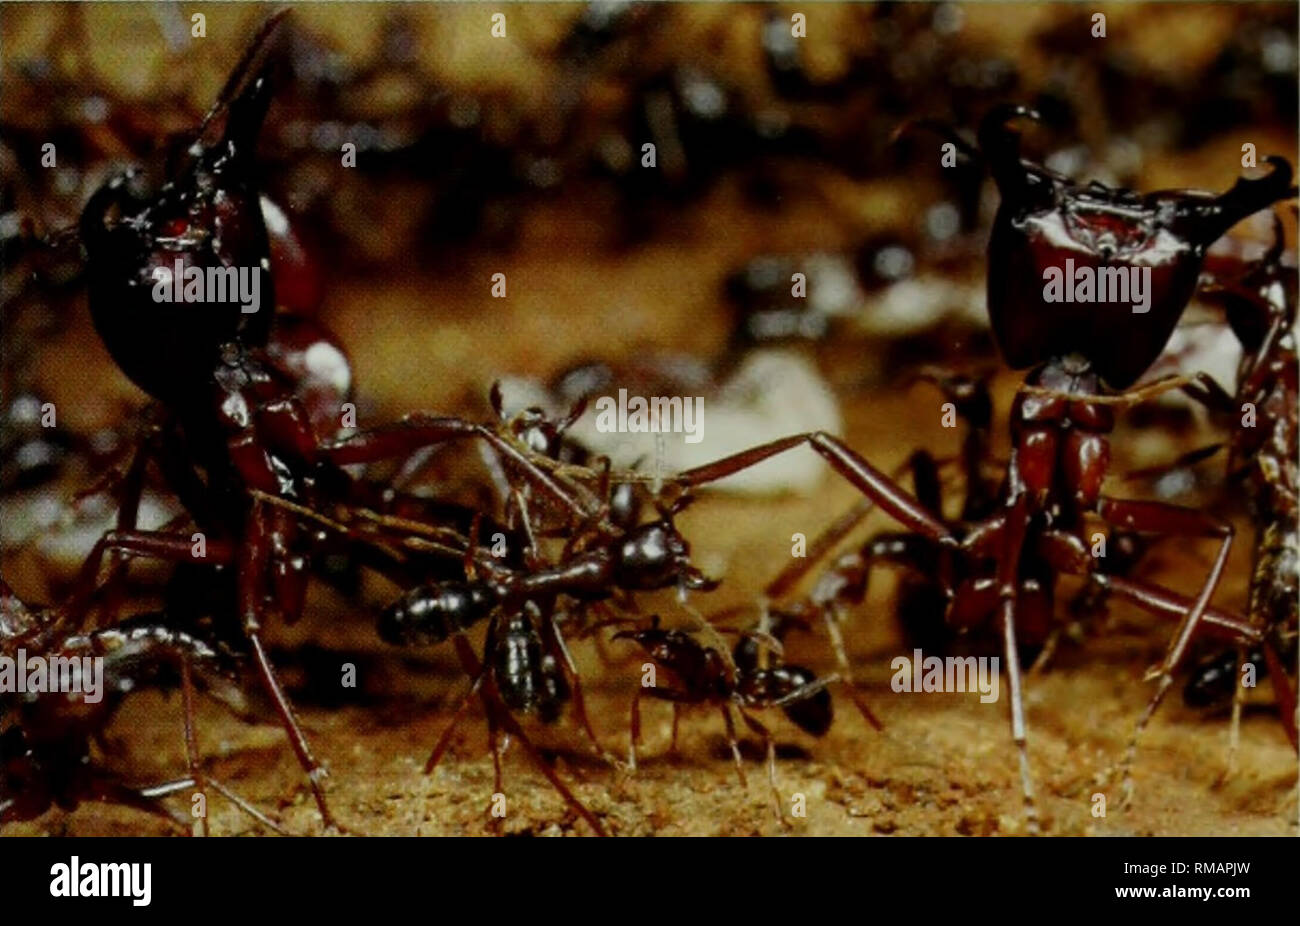 . Annual report. Harvard University. Museum of Comparative Zoology. MCZ NEWS: RESEARCH Altruistic Army Ants Colonies of army ants are usually antagonistic to one another, attacking soldiers from rival colonies in border disputes that keep the colonies separate. But research by postdoctoral fellow Daniel Kronauer demonstrates that colonies can sometimes be cooperative instead of combative. In cases when an army ant colony loses its queen, its workers are absorbed, not killed, by neighboring colonies, and within days are treated as part of the new colony. Army ant colonies are dominated by a sin Stock Photo